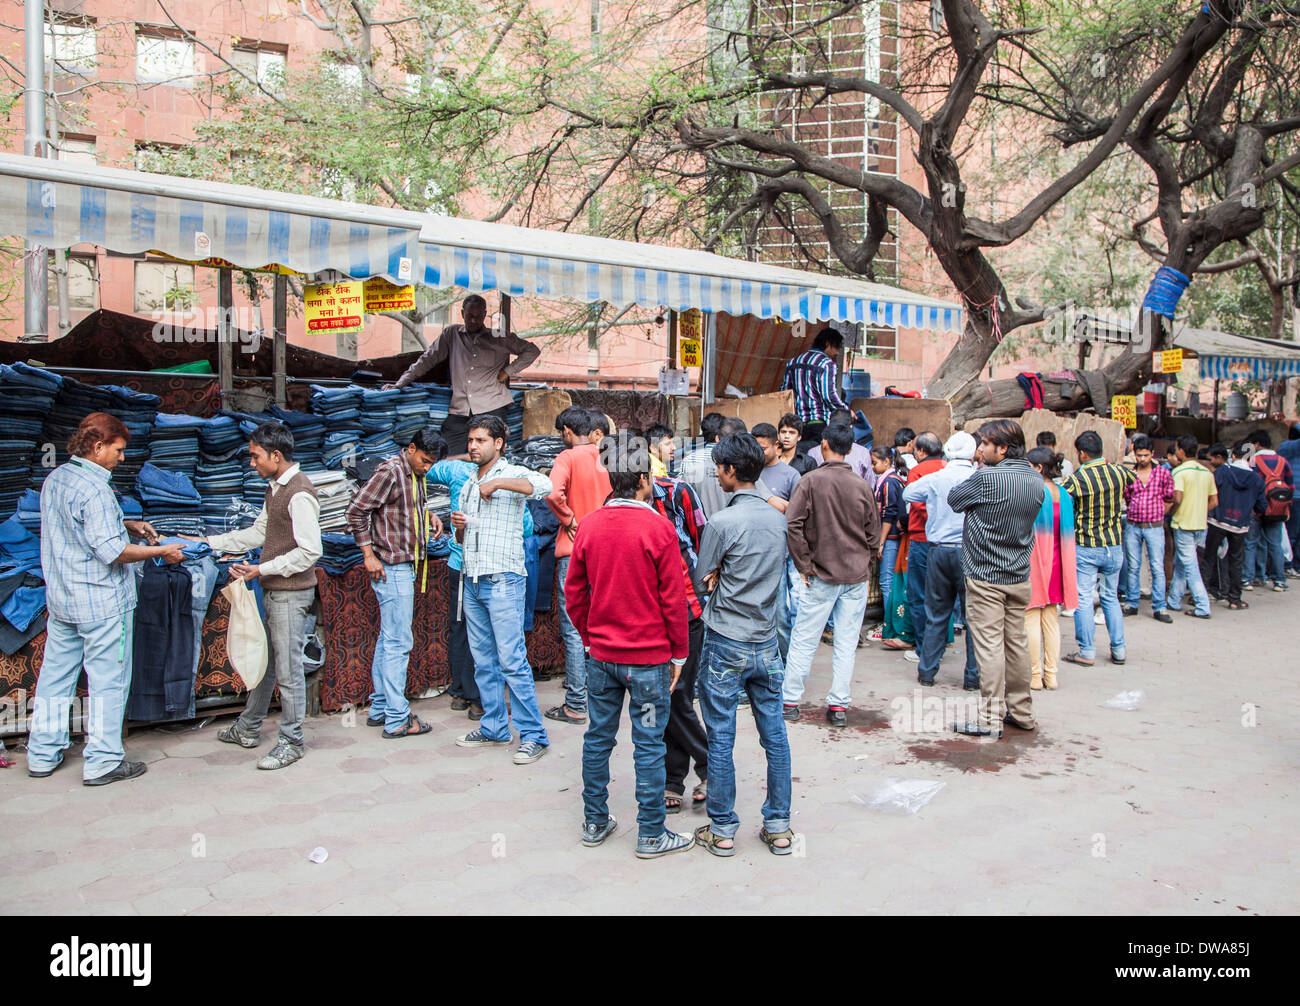 Crowded local market in New Delhi, India: roadside stall on street selling blue denim jeans piled high Stock Photo